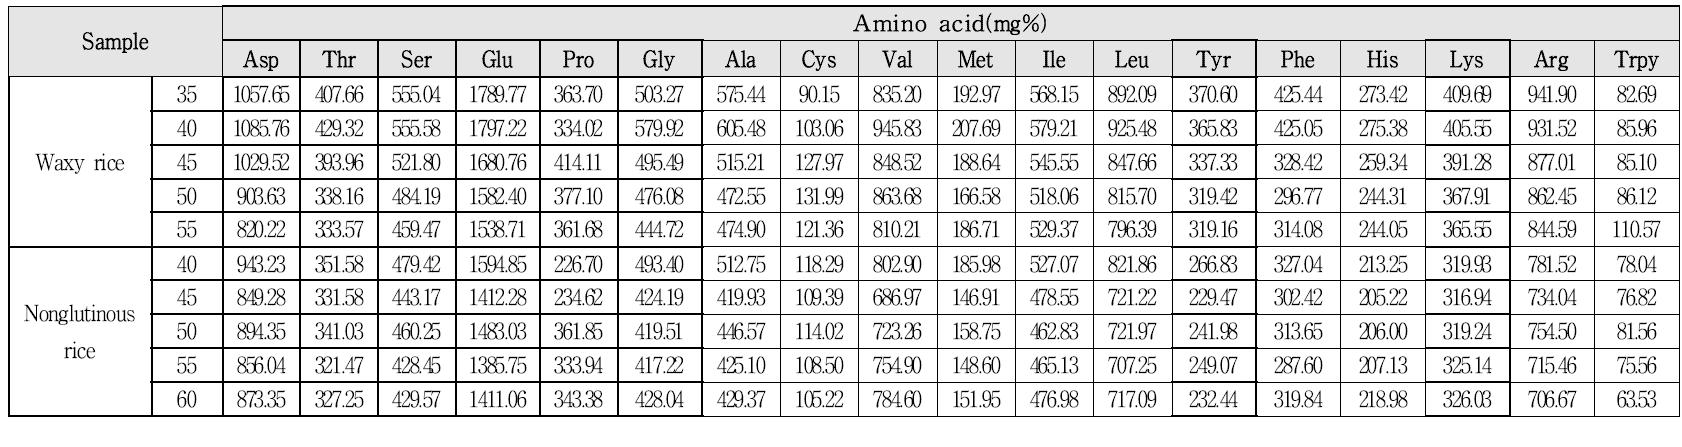 Amino acid contents of rough rice harvested at different mature stages.